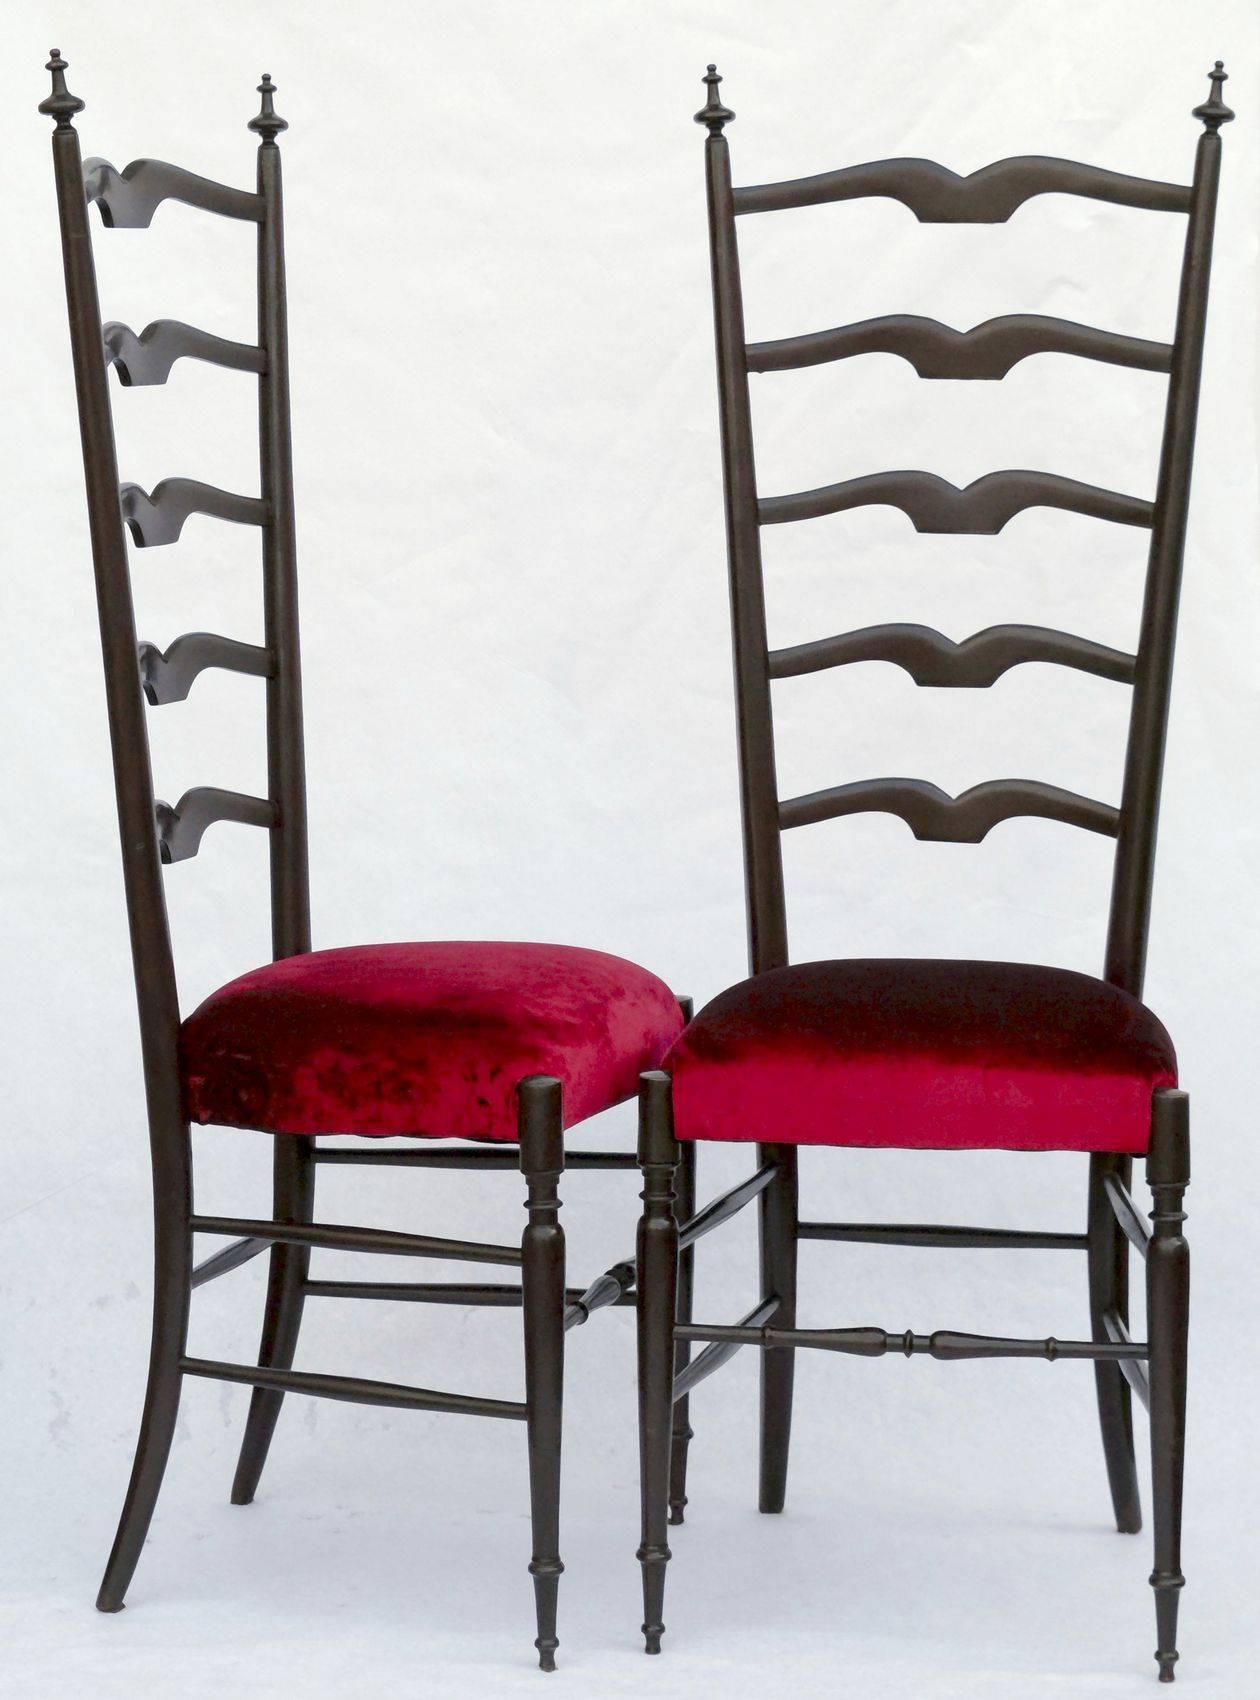 Exquisite pair of hall side chairs, attributed to Paolo Buffa, restored with French polish hand finish and new upholstery. Red Burgundy Tuscan woven velvet by top fashion supplier Alessandro Bini. Chairs are showing the typical Chiavari structure